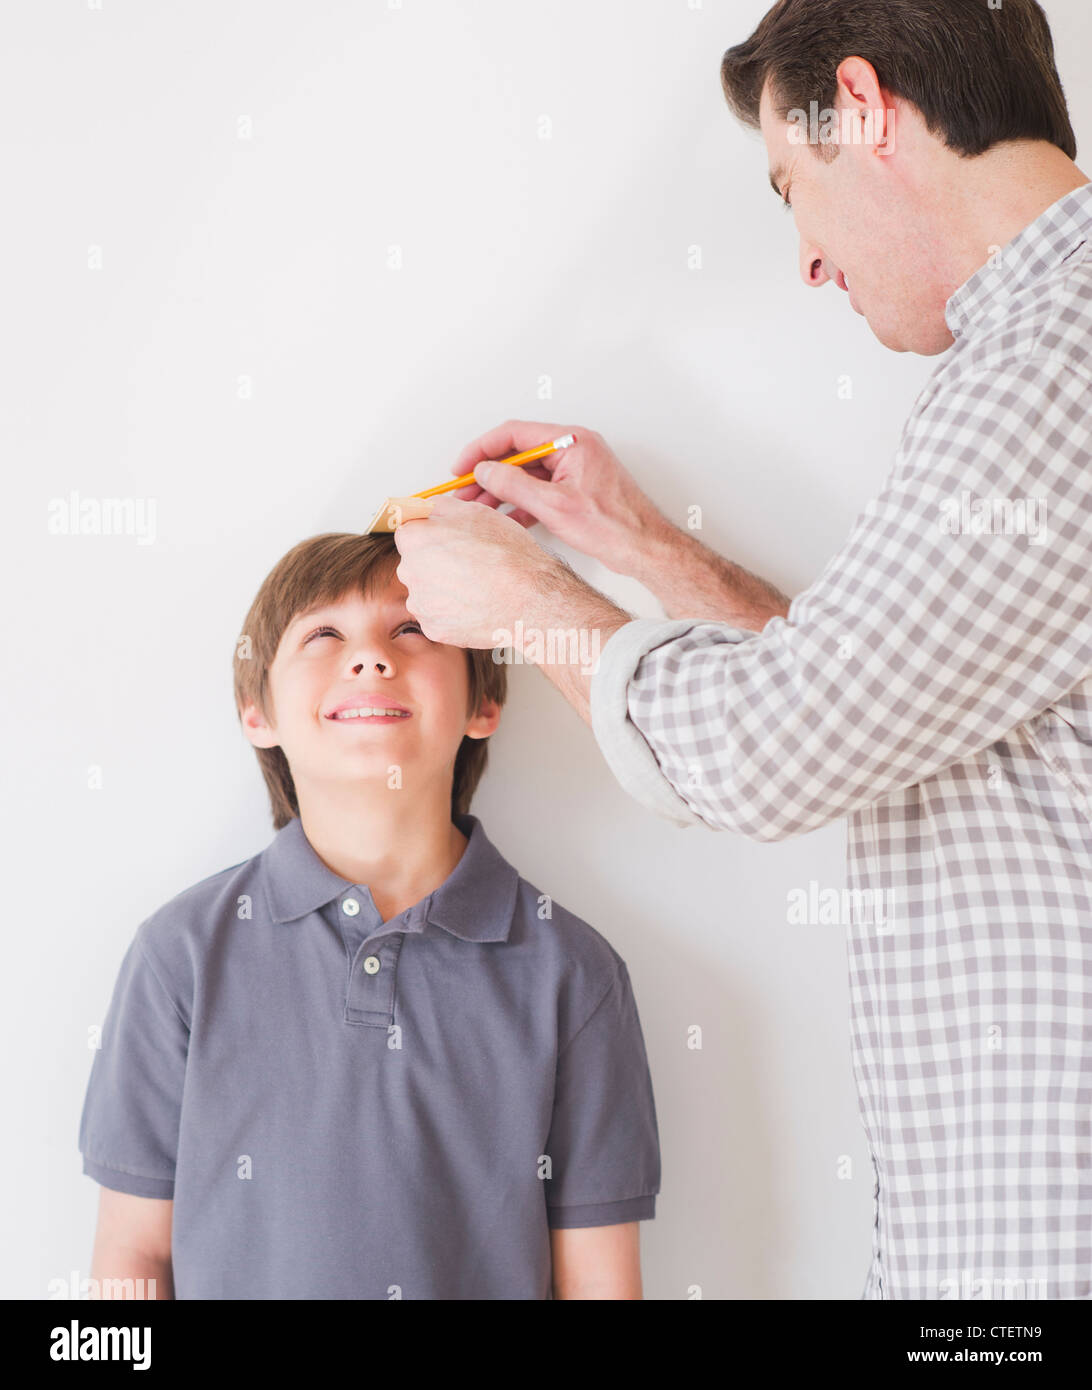 USA, New Jersey, Jersey City, Father measuring son's (10-11 years) height  Stock Photo - Alamy